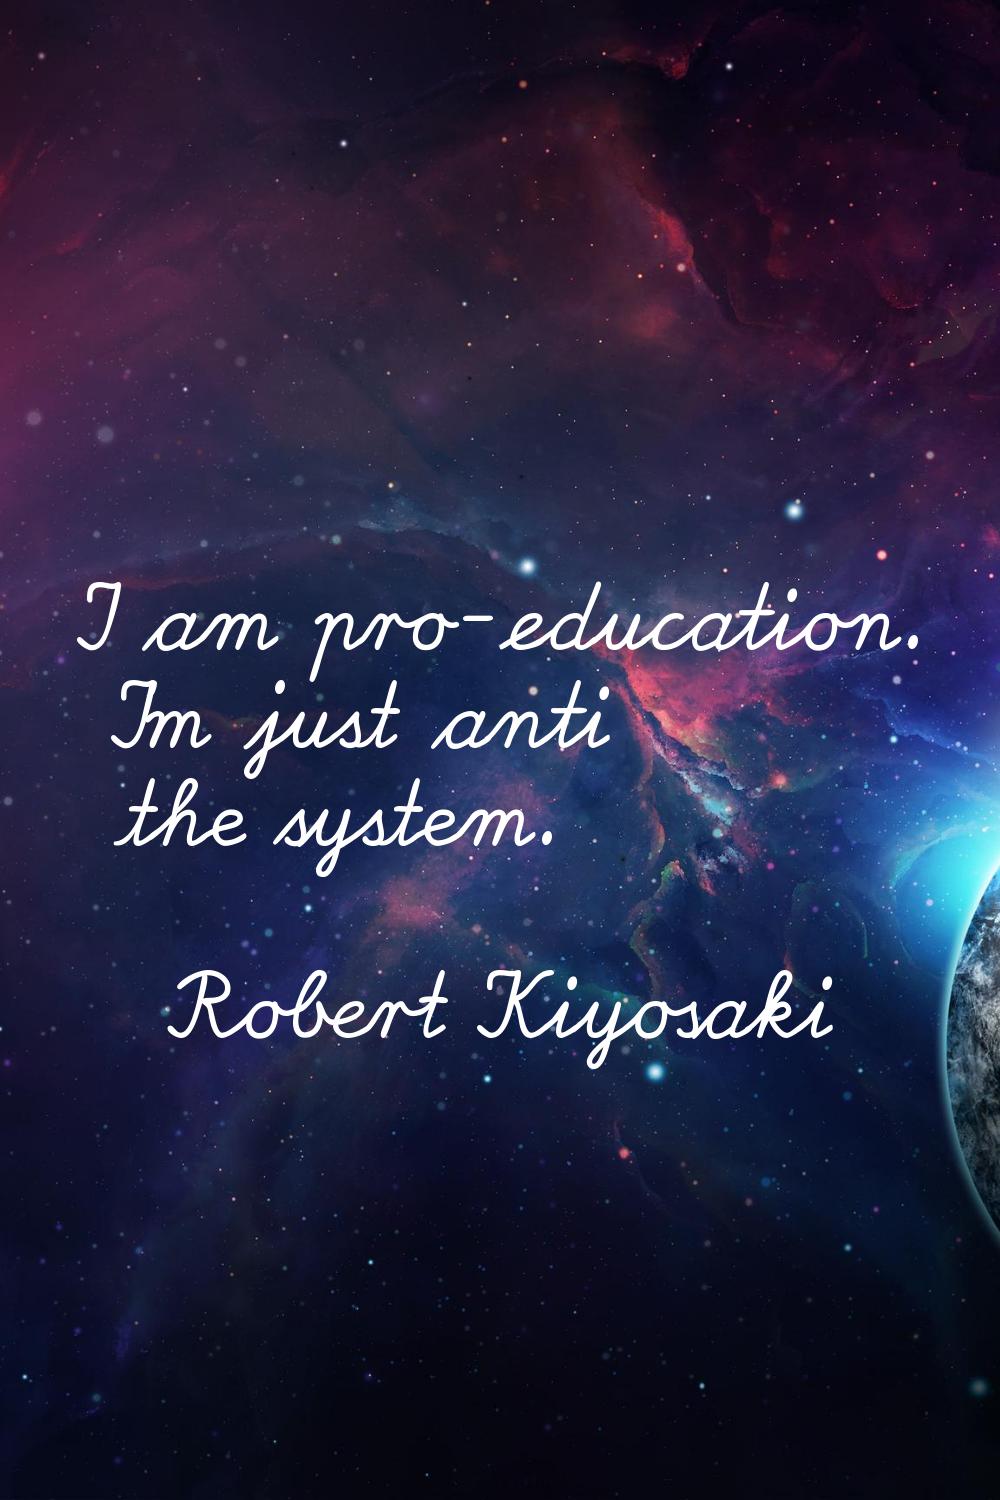 I am pro-education. I'm just anti the system.